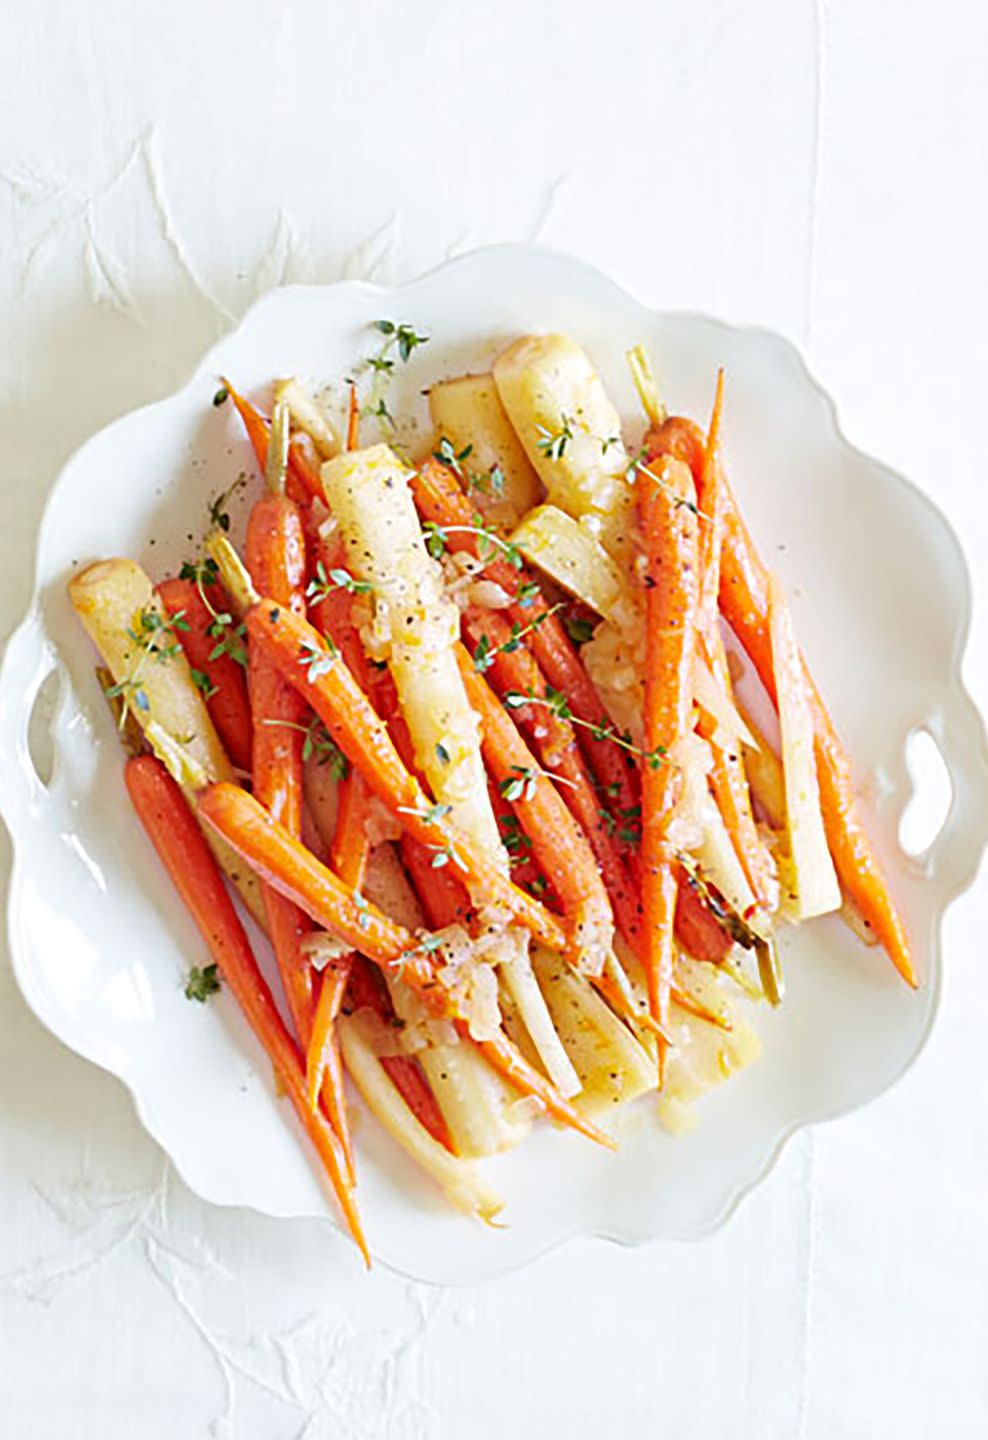 orange braised carrots and parsnips